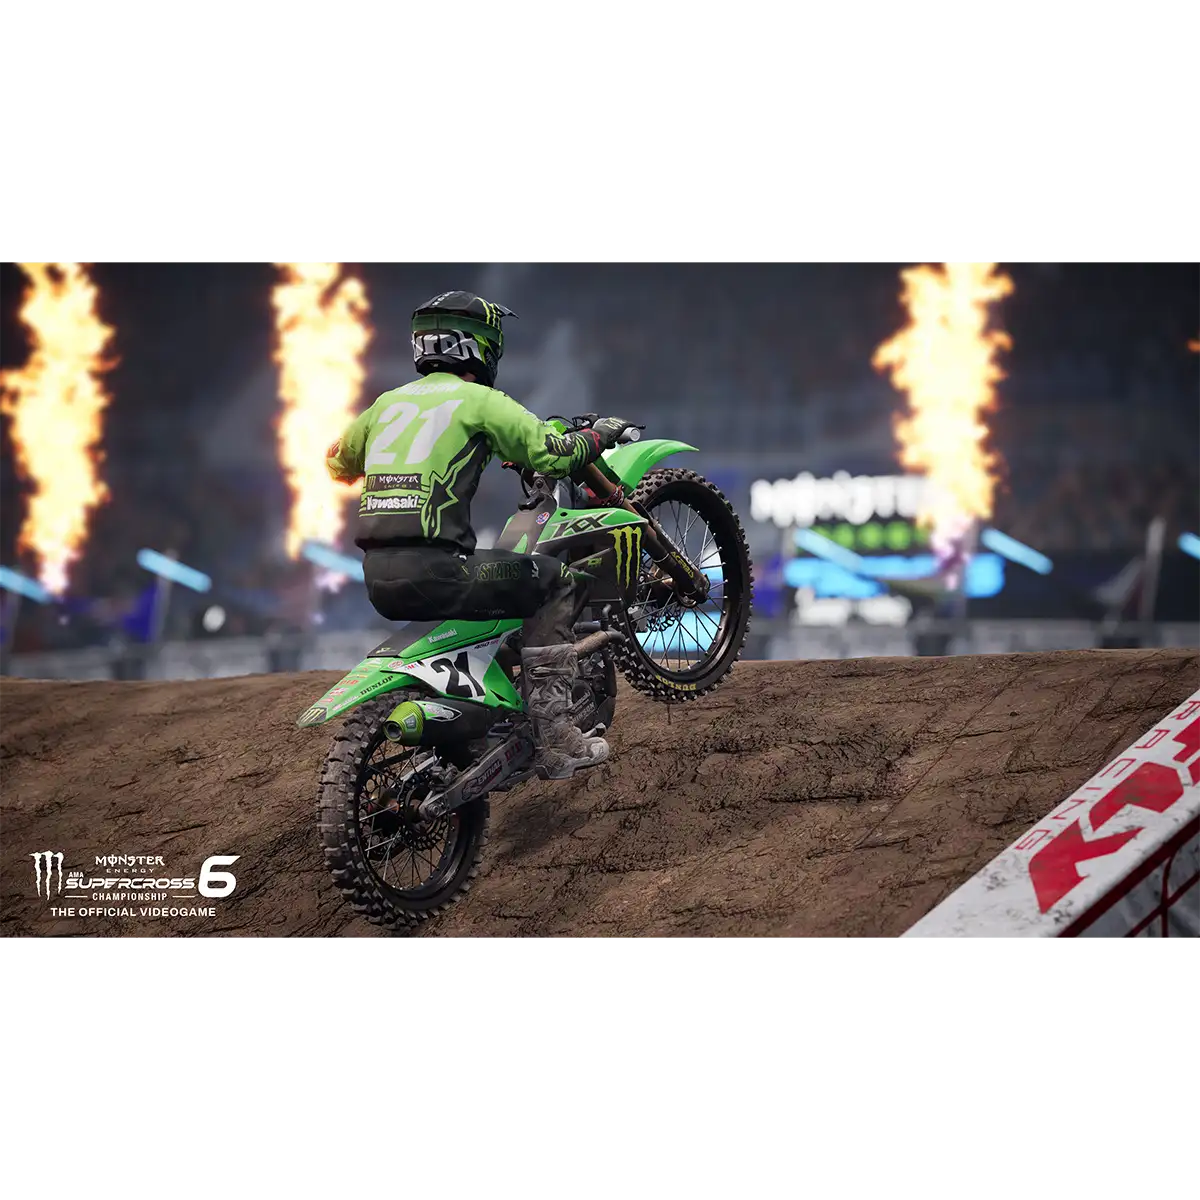 Monster Energy Supercross - The Official Videogame 6 (PS5) Image 6